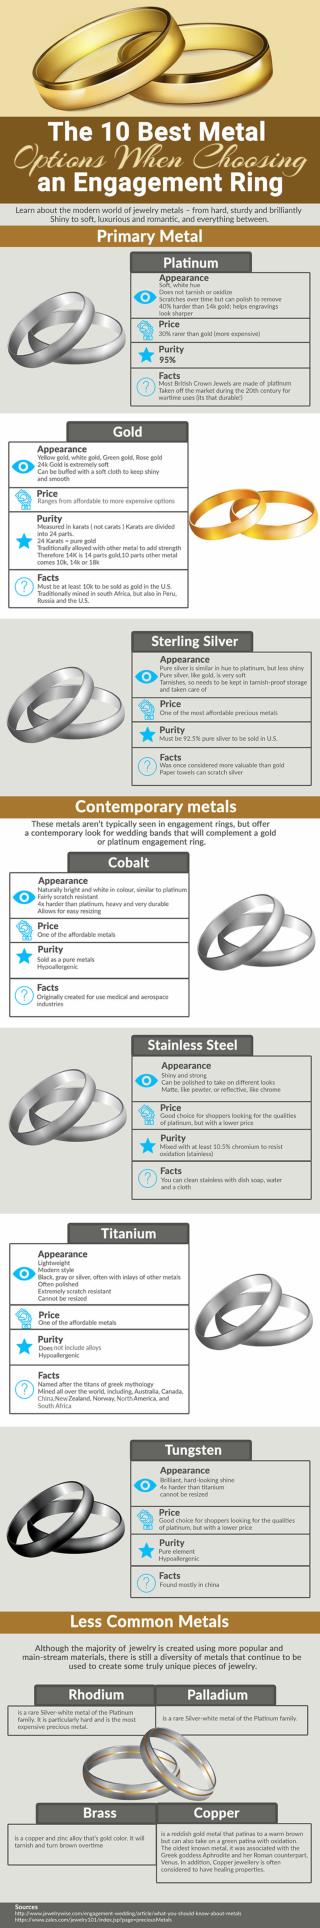 The 10 Best Metal Options When Choosing an Engagement Ring